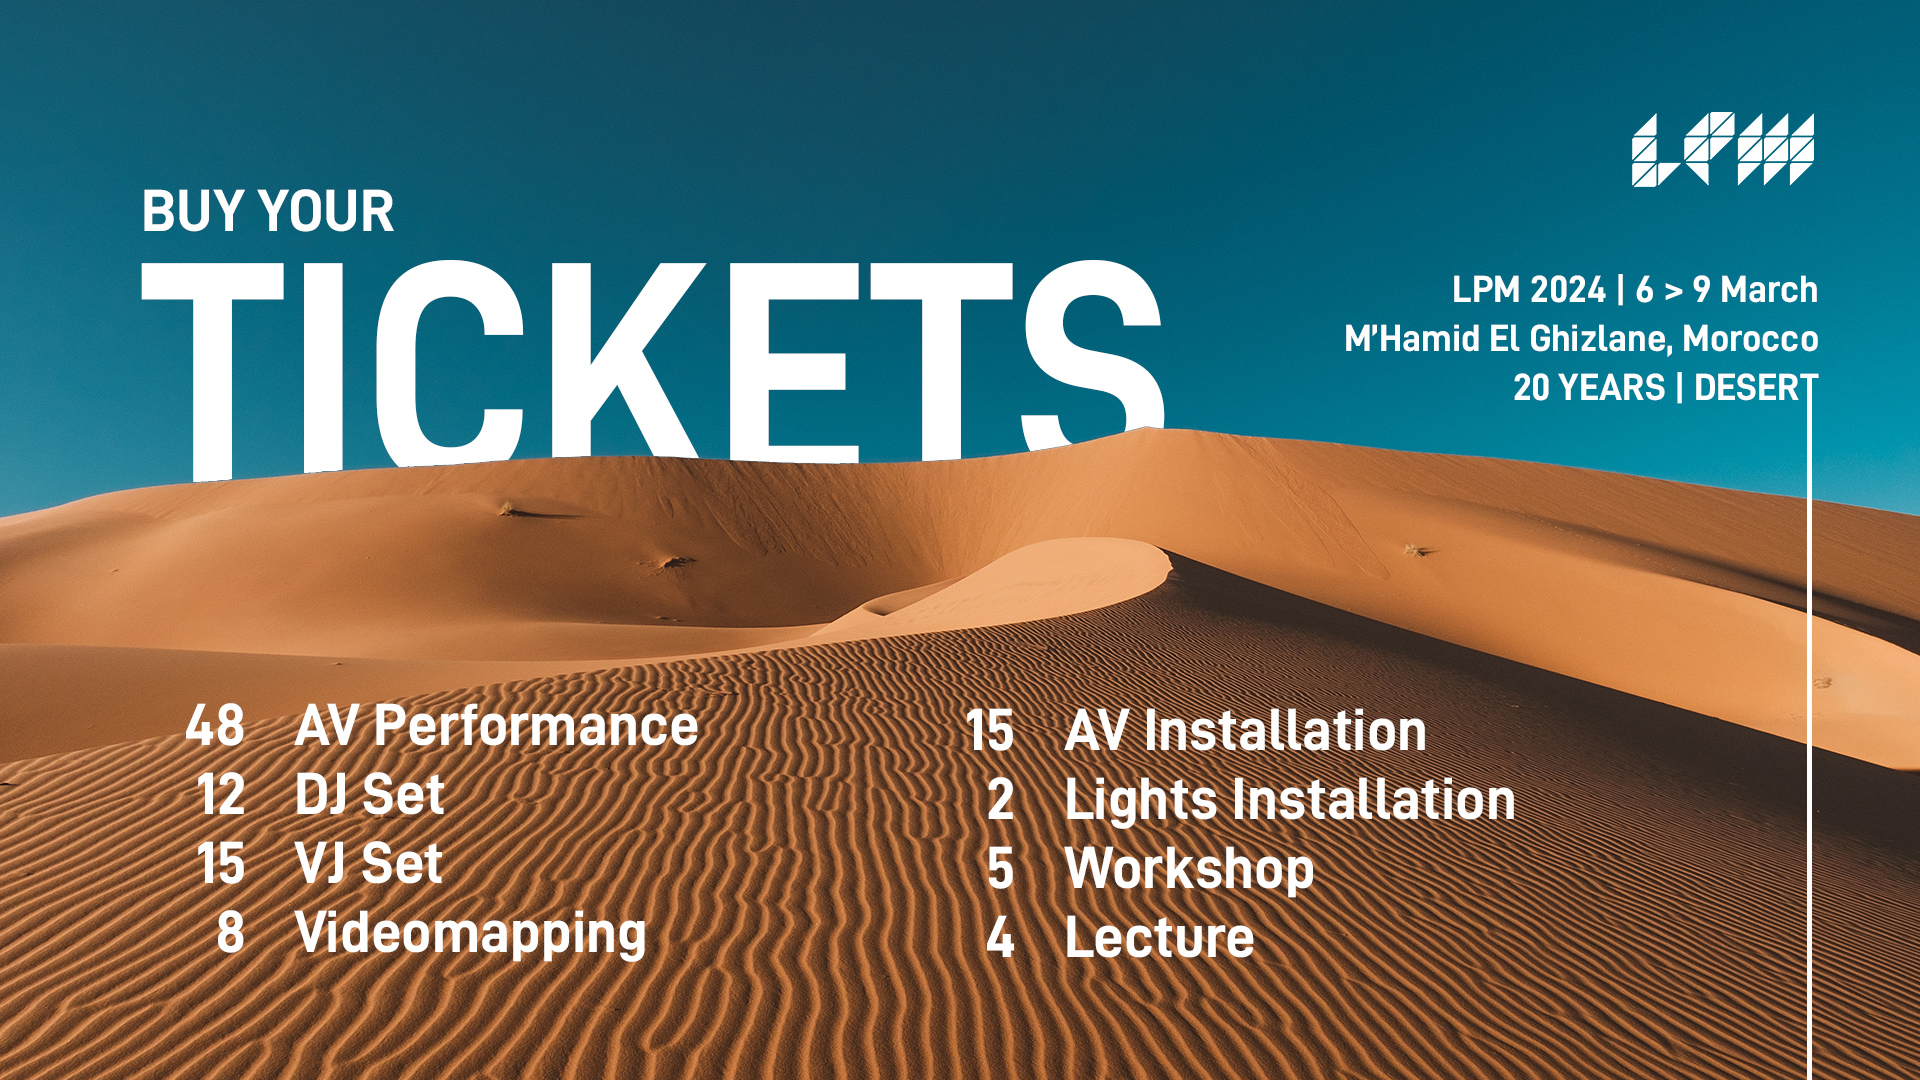 Image for: LPM 2024 Morocco | TICKETS